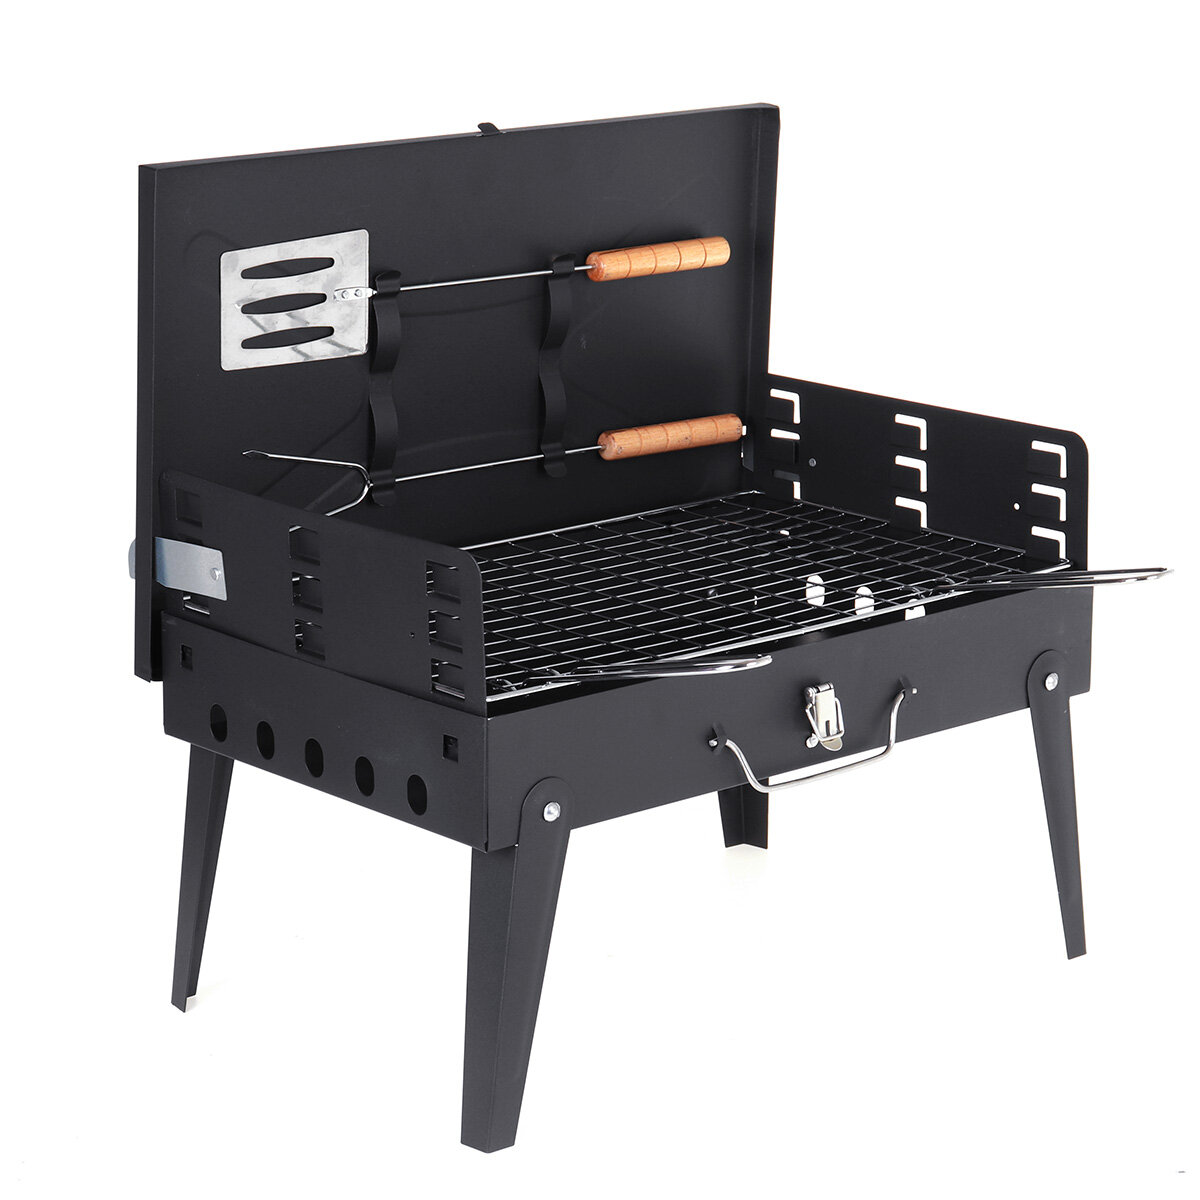 17.32x10.24x8.66 inch BBQ Grill Houtskool Opvouwbare Fornuis Barbecue Accessoires Camping Picknick Reizen